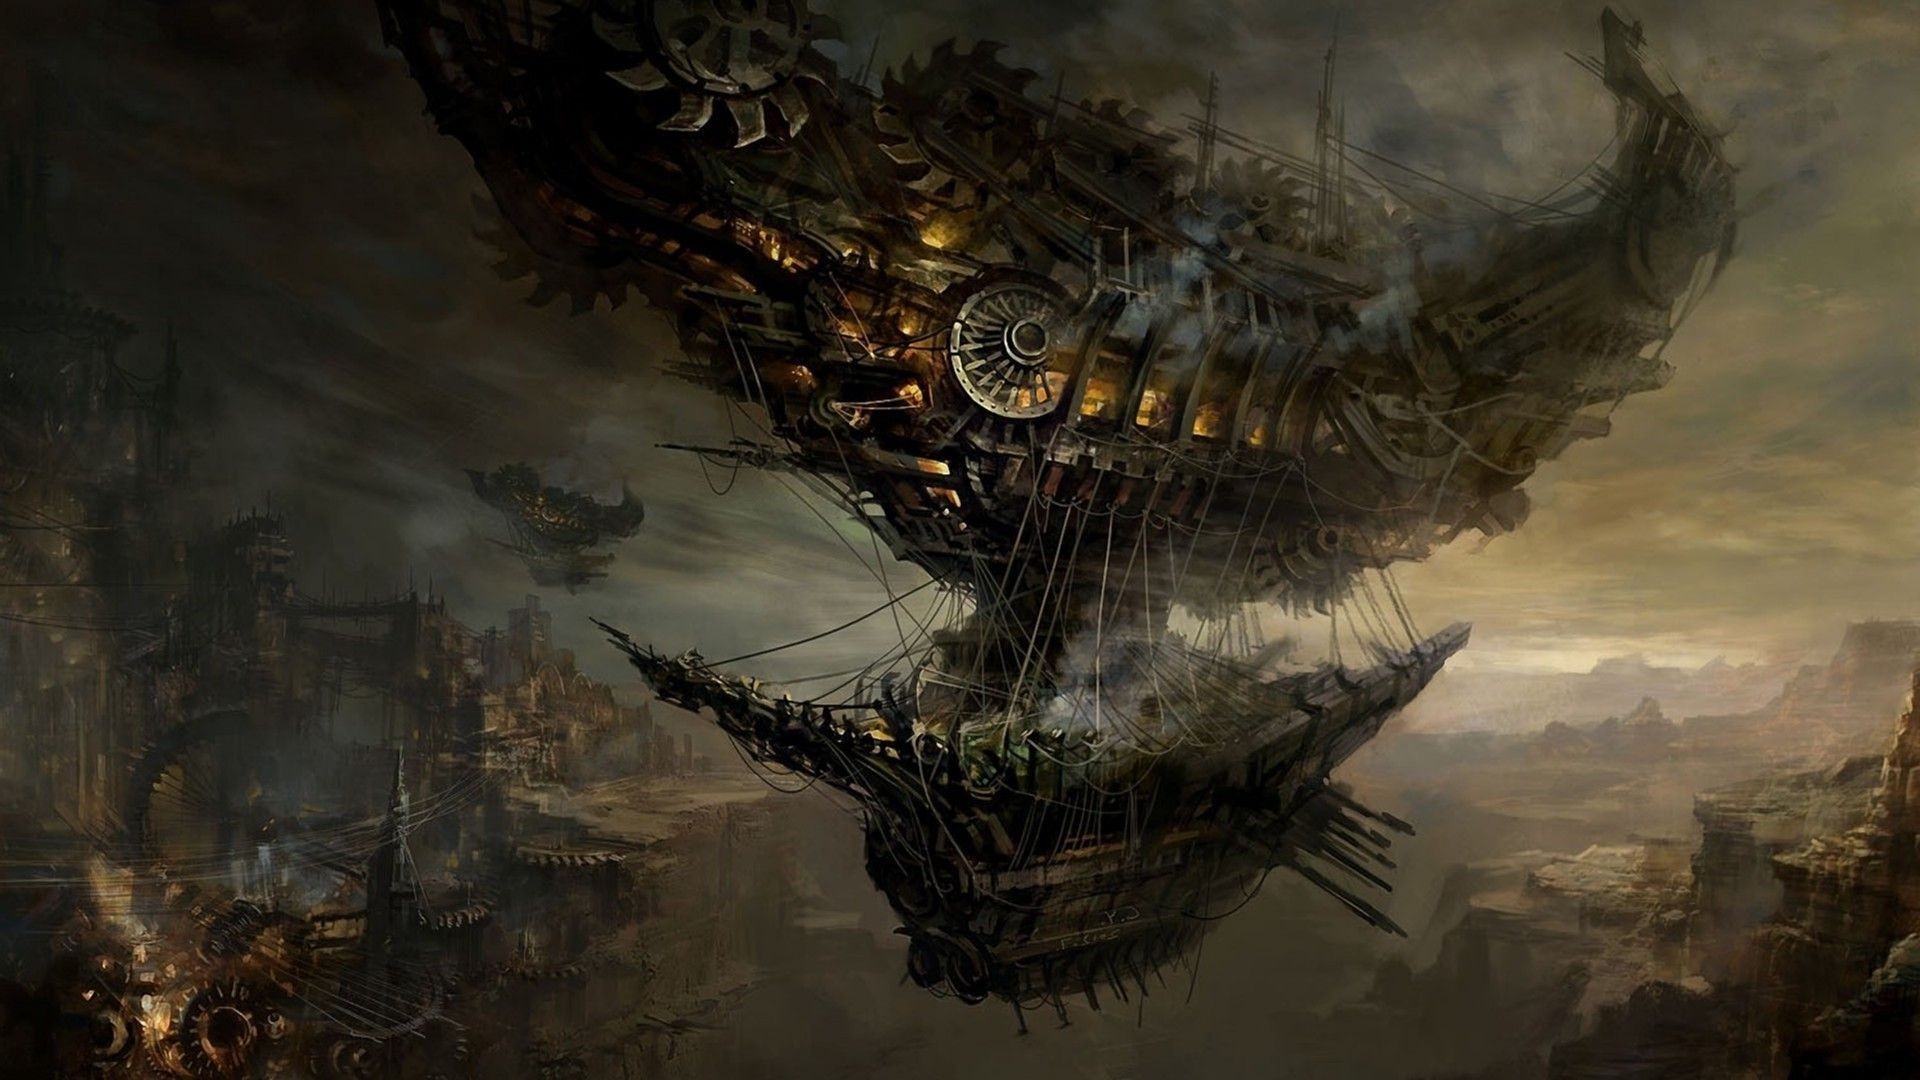 1920x1080 tablet,hd abstract wallpapers, battle, display,steampunk, pirate .